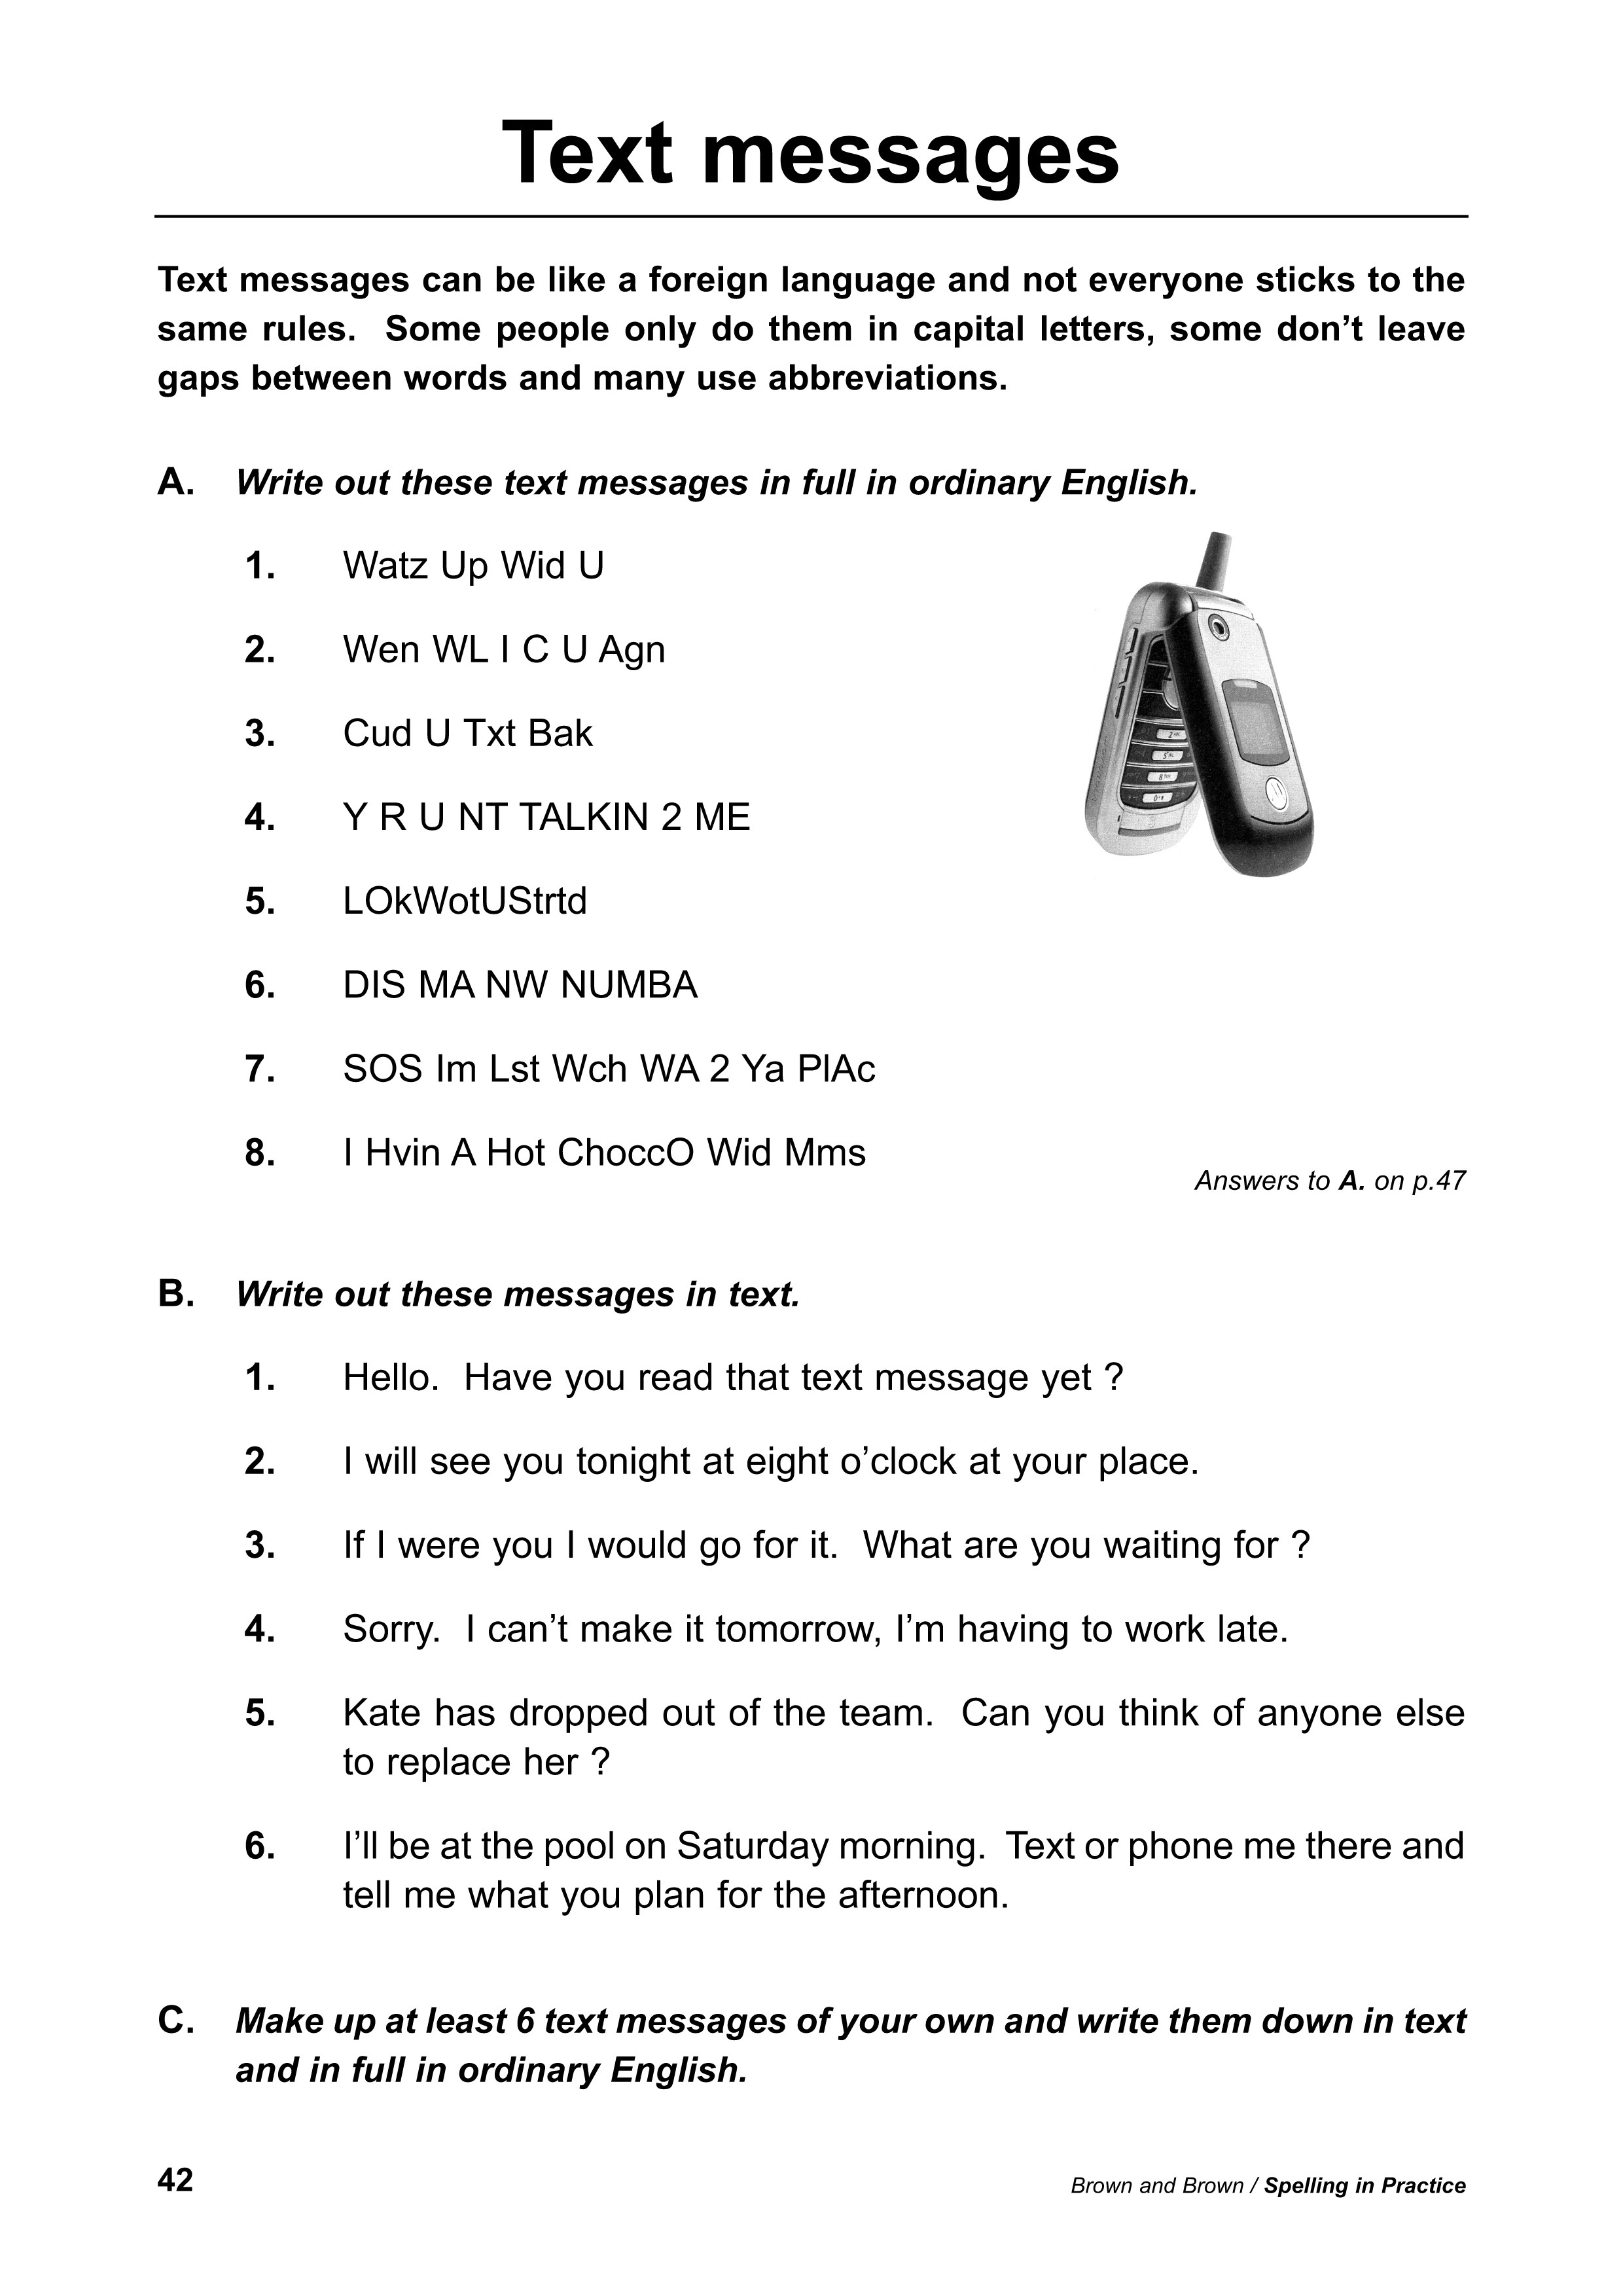 spelling practice worksheets for adults